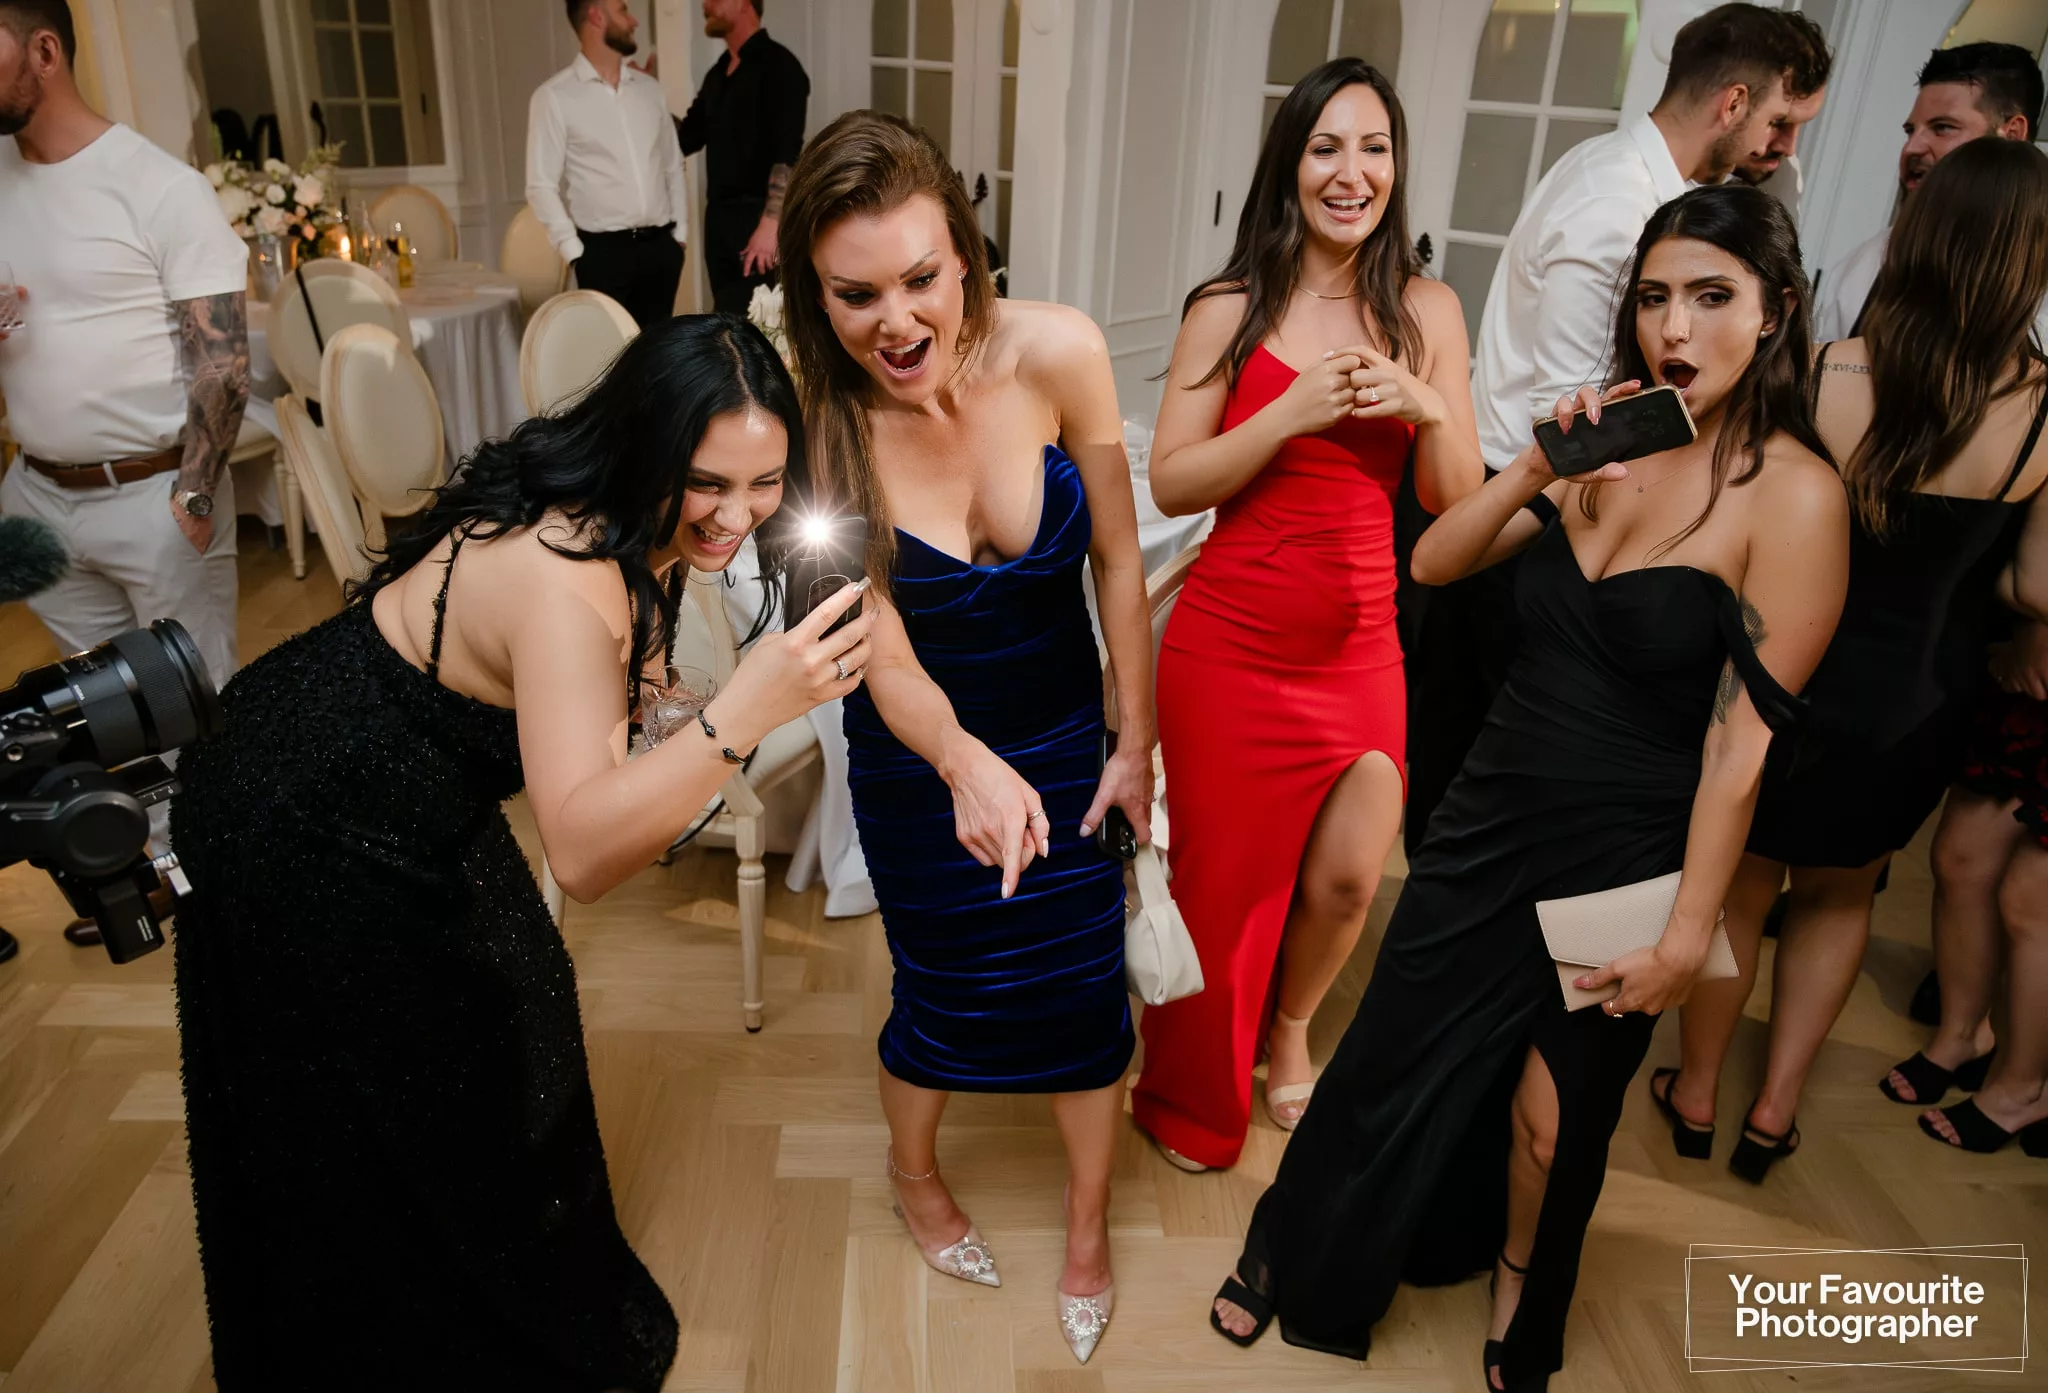 Wedding guests take photos of a funny moment